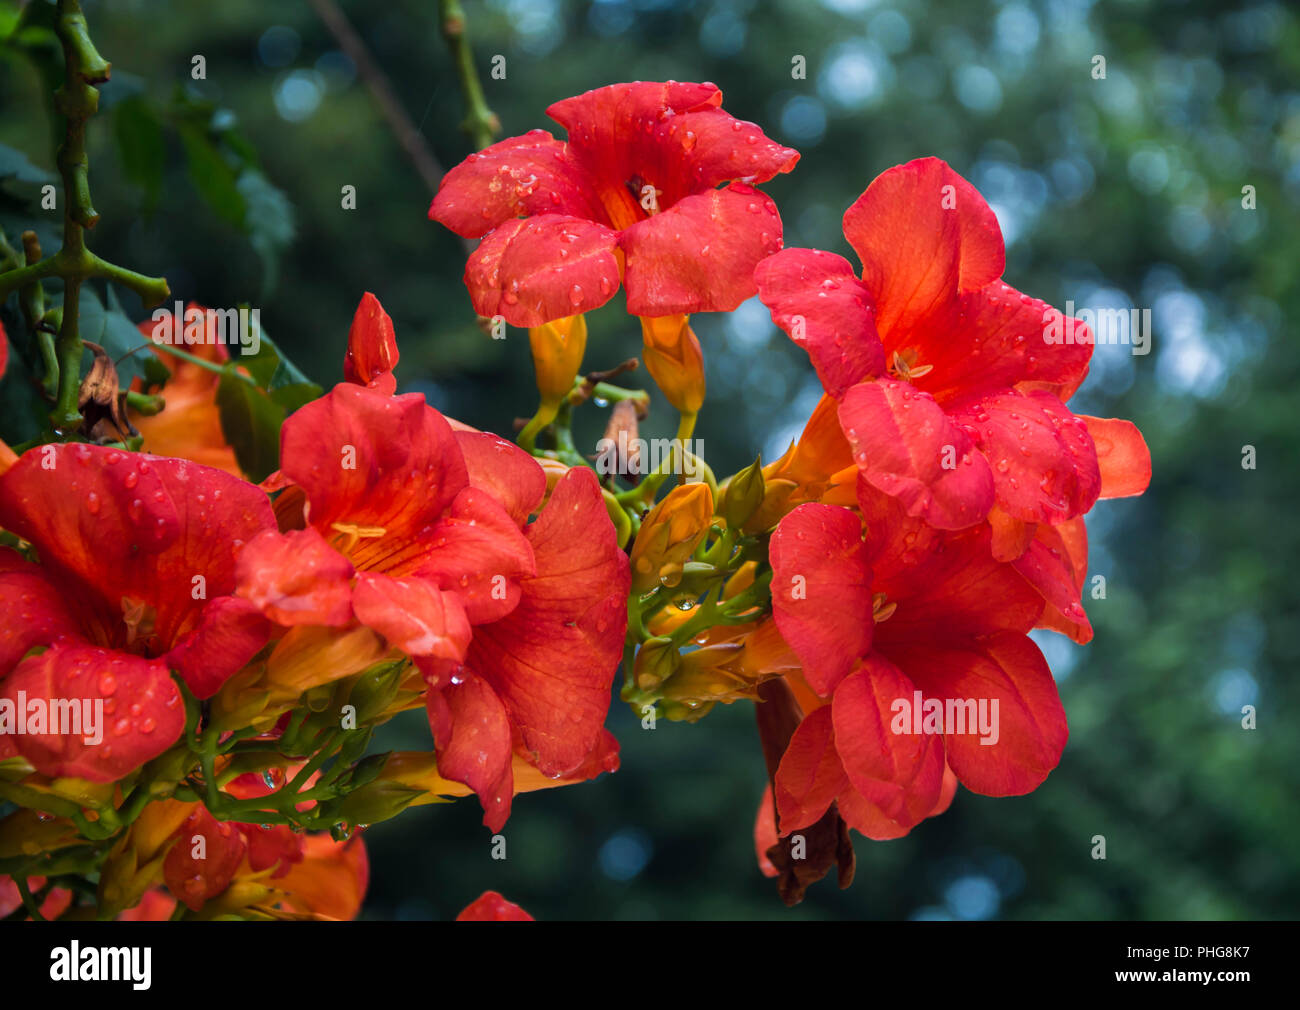 Exotic jungle red flower are shown close-up in the center of the frame.Large orange-red funnel-shaped flowers of Campsis are depicted close-up. Stock Photo